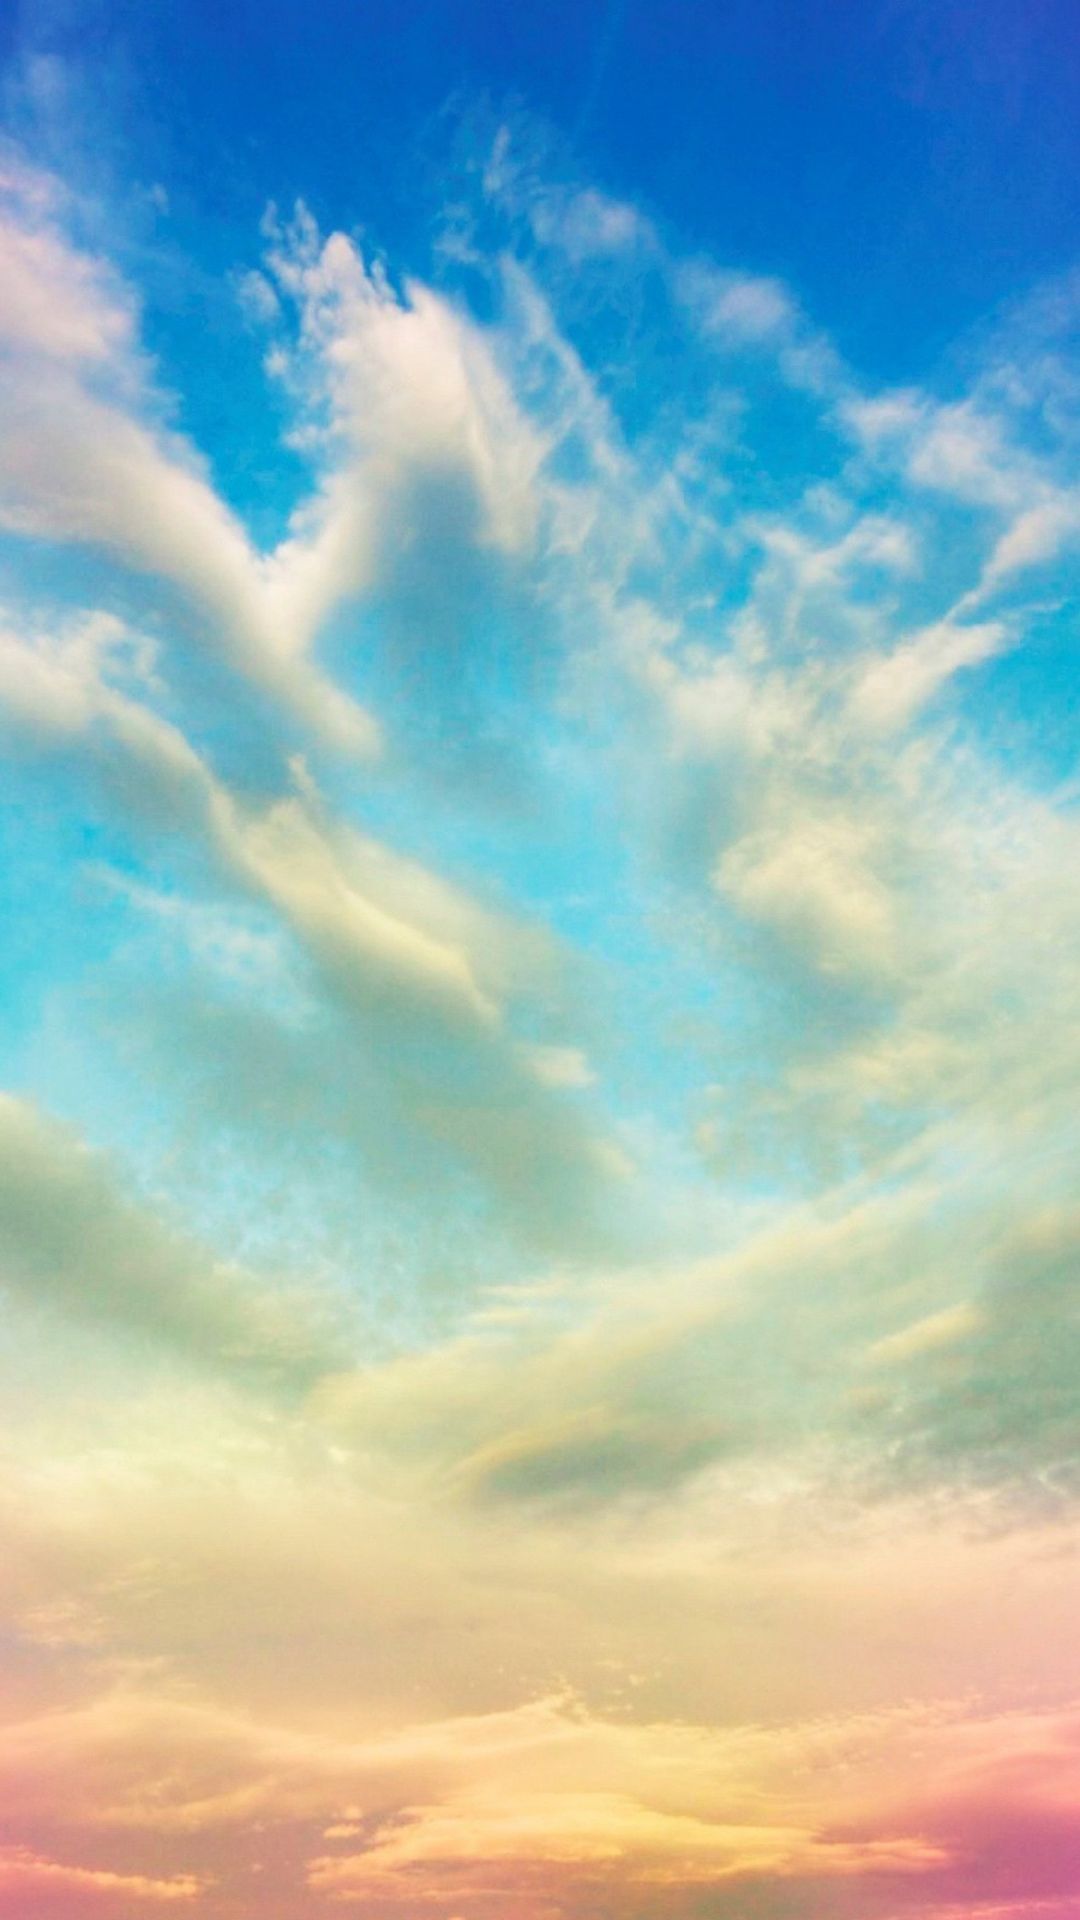 1080x1920 Clouds iPhone Background Free Download on WallpaperBat